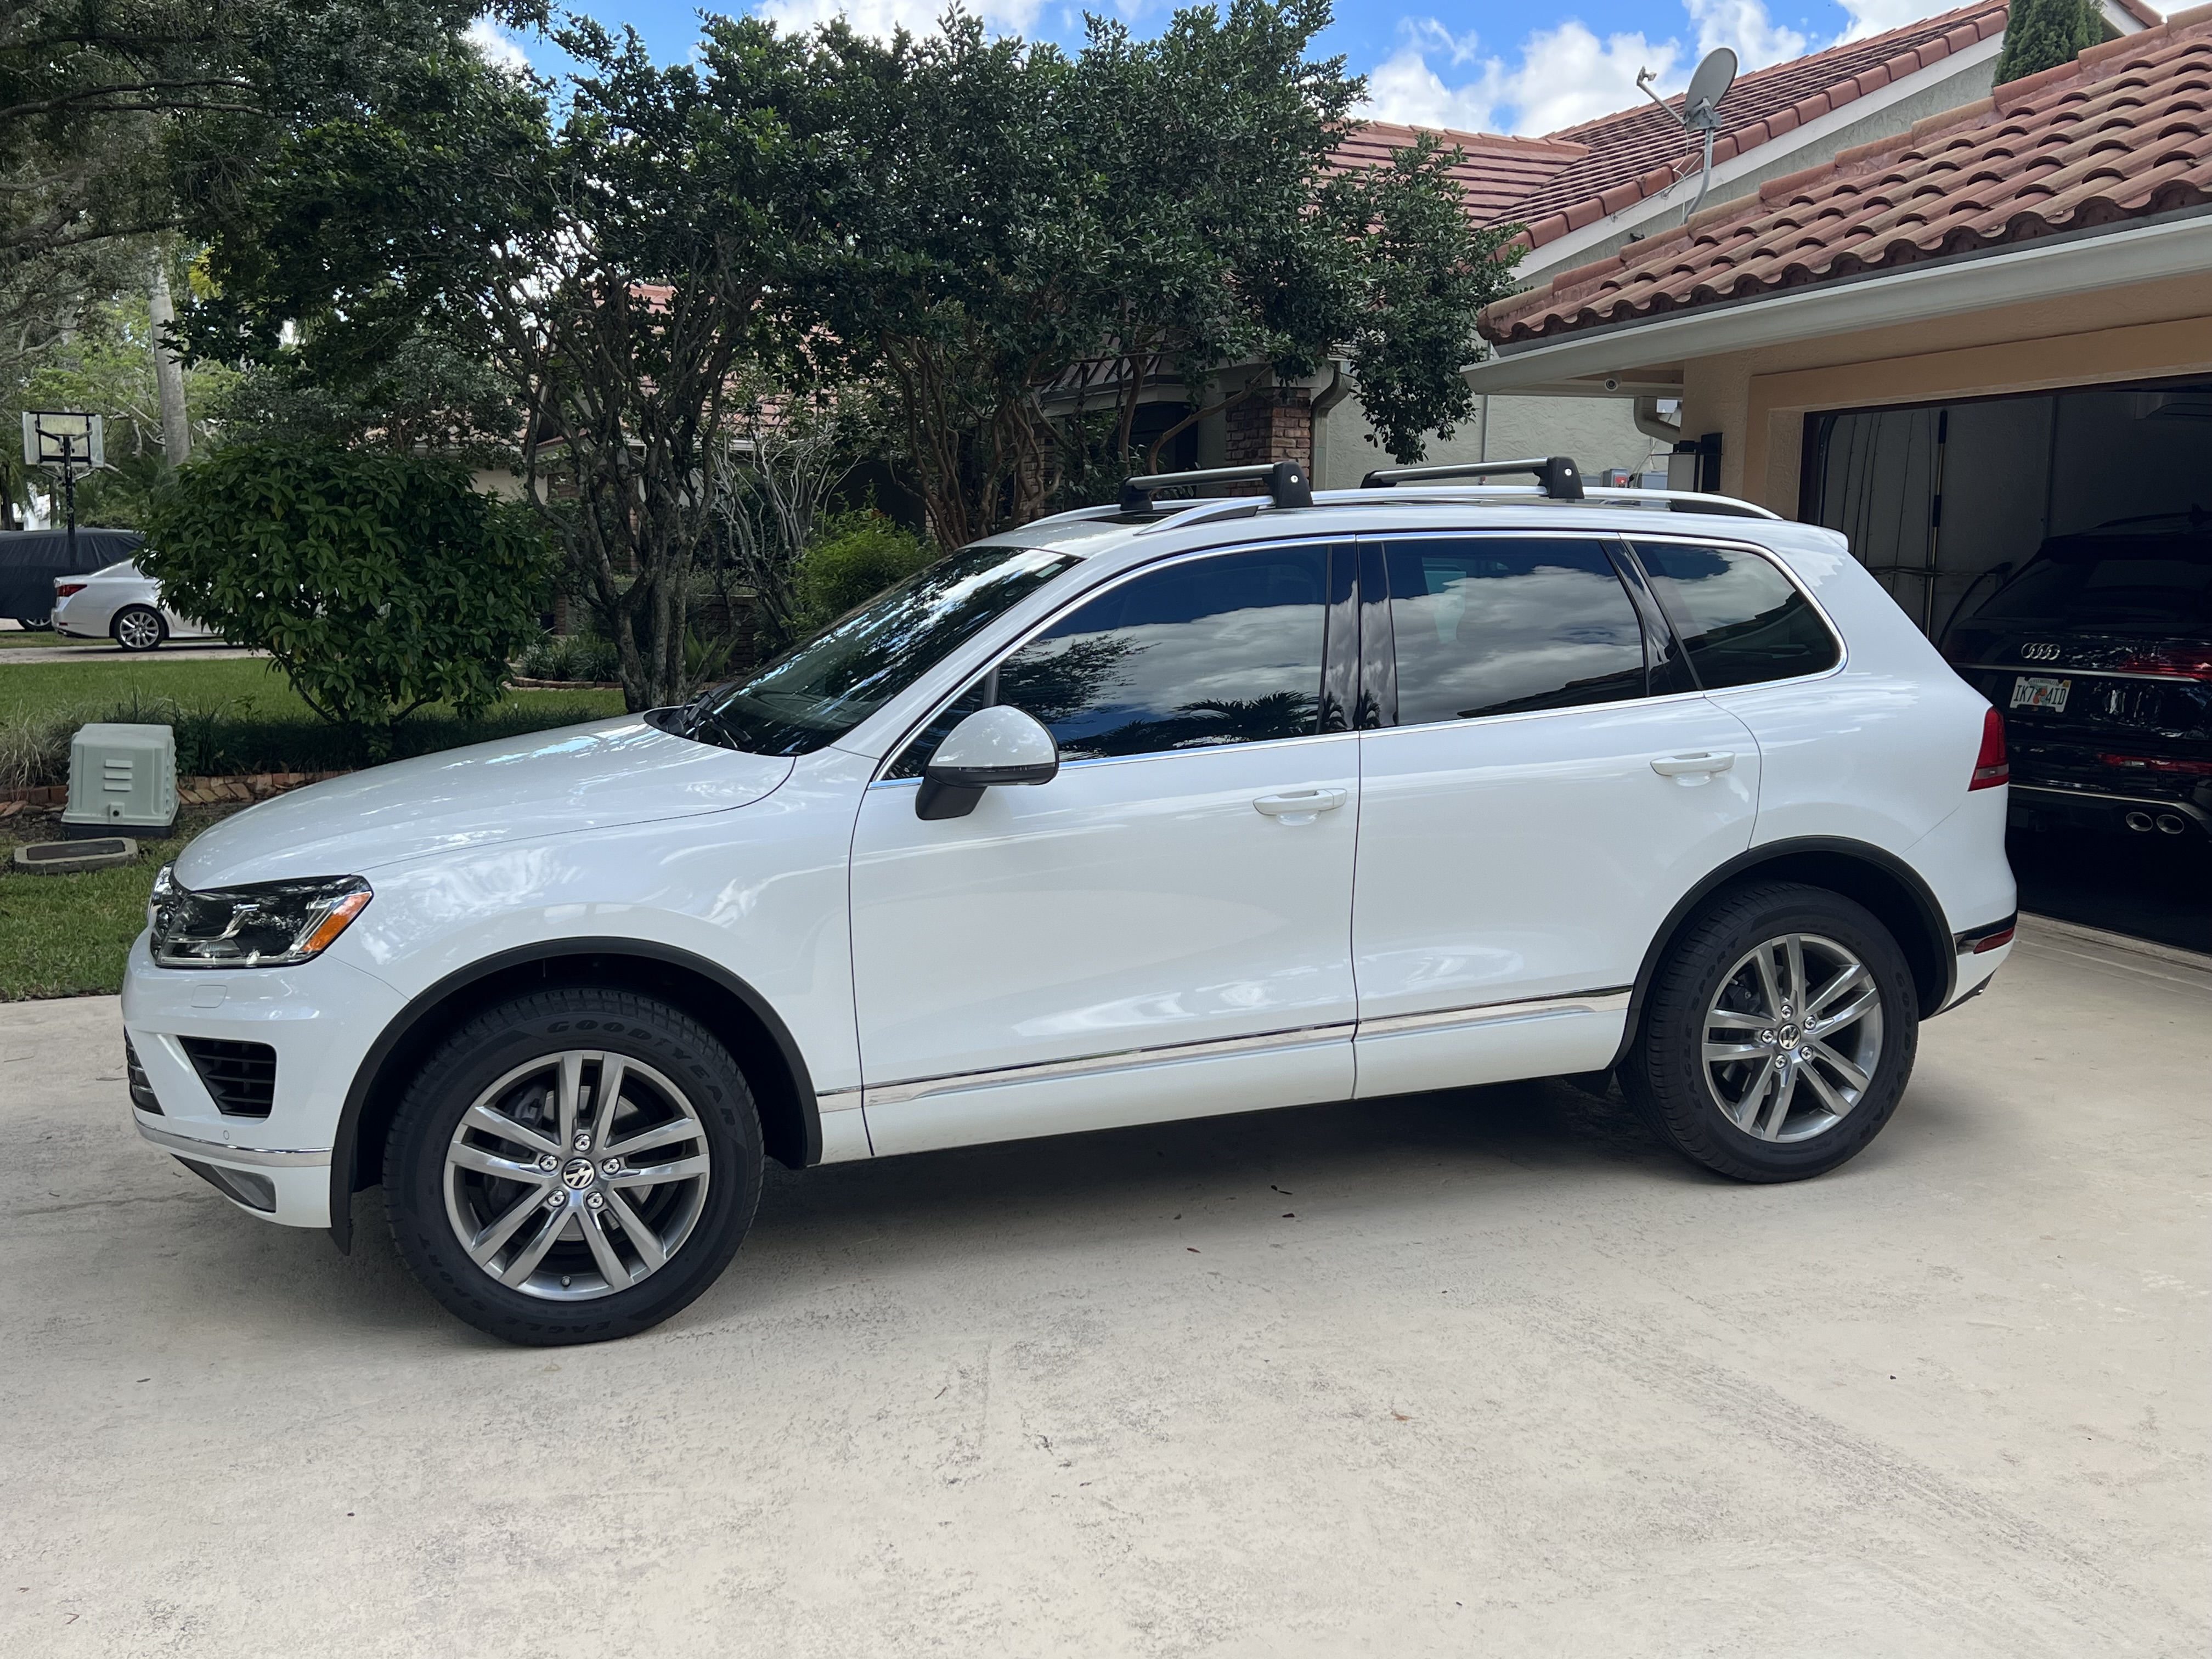 Used Volkswagen Touareg for Sale Right Now - Autotrader